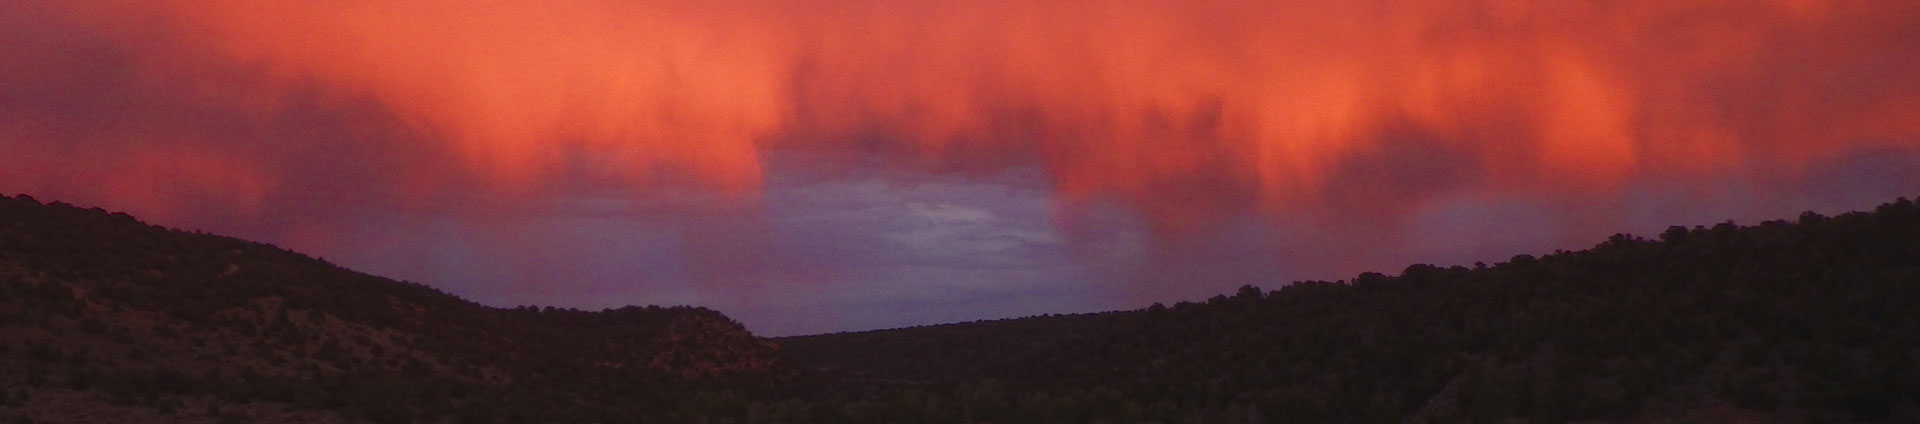 header image of red and orange clouds